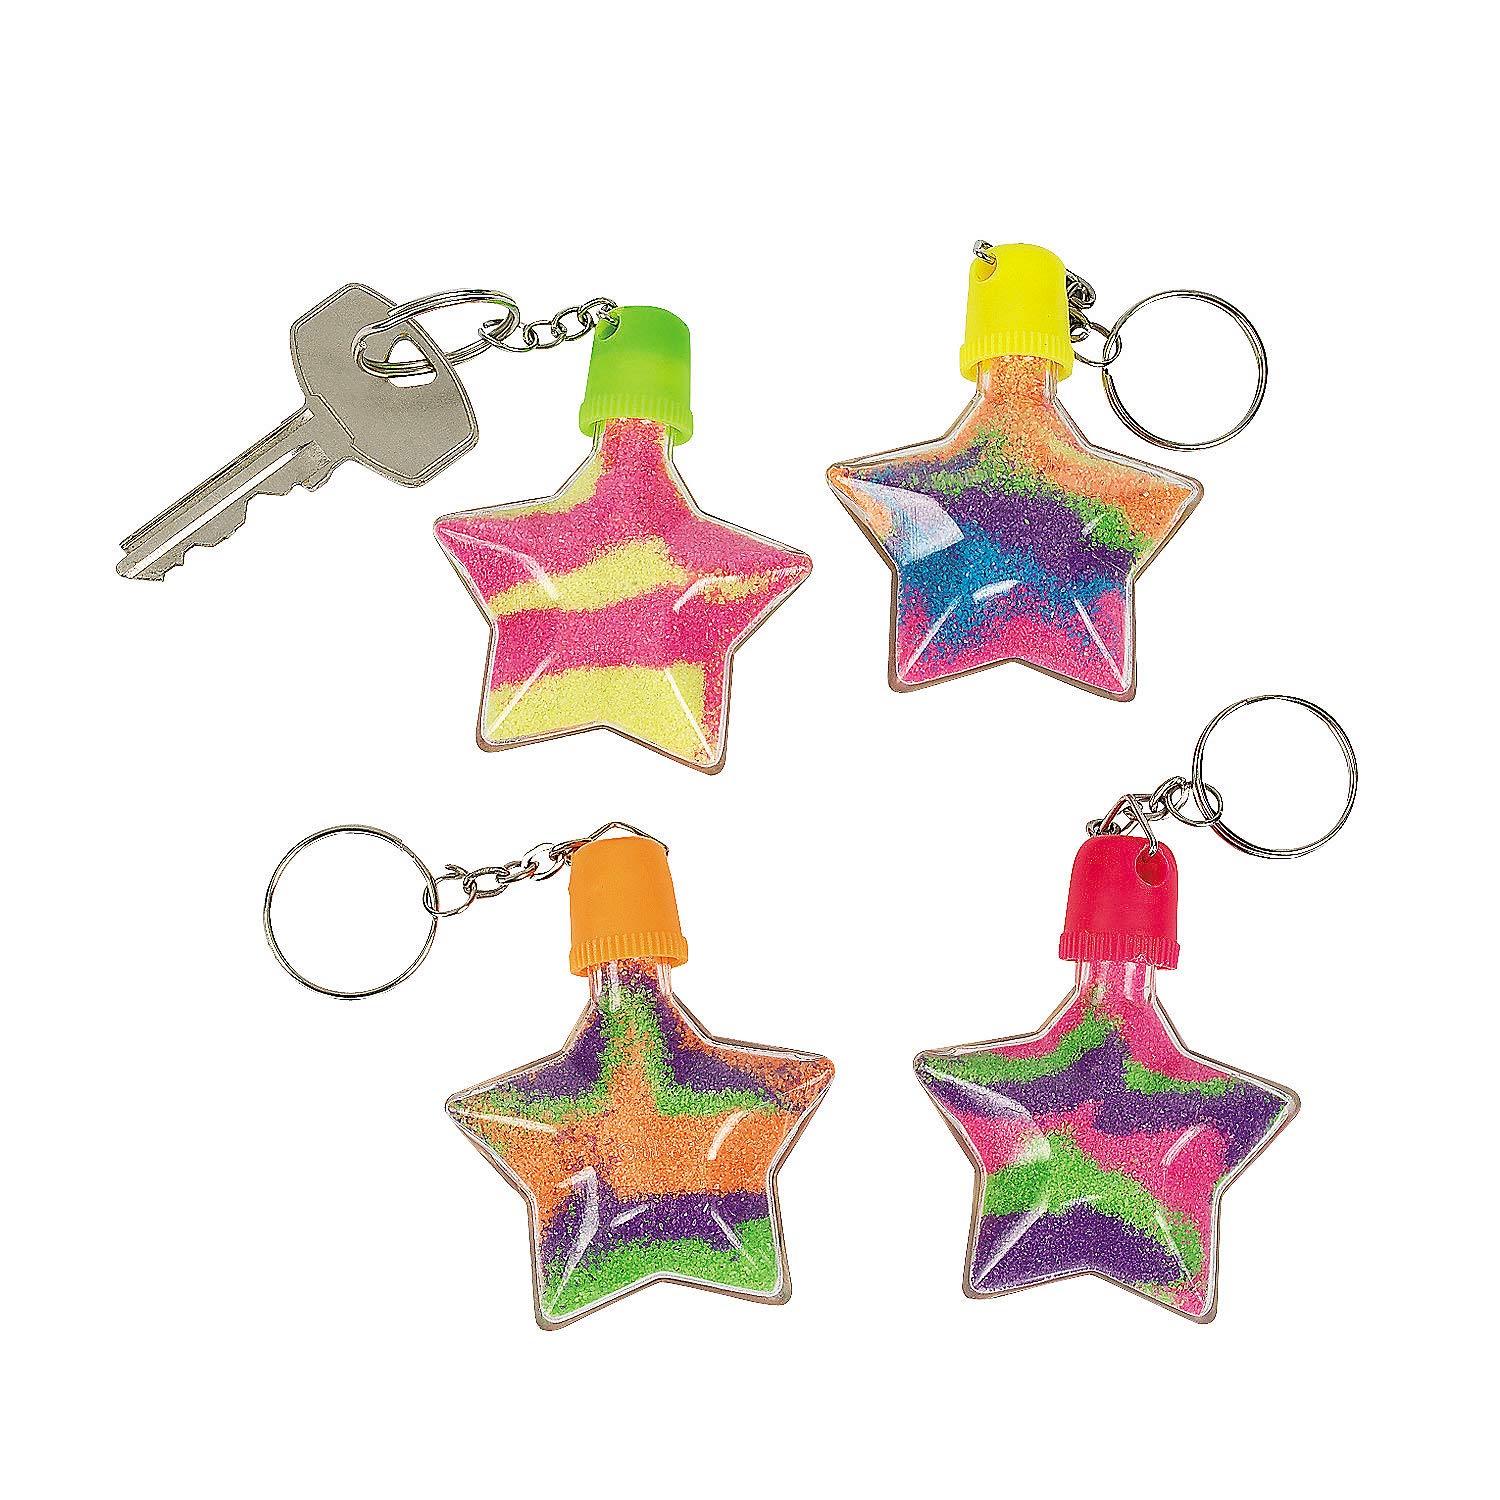 Star Sand Art Bottle Key Chains - Set of 12 - DIY Crafts for Kids and Fun Home Activities